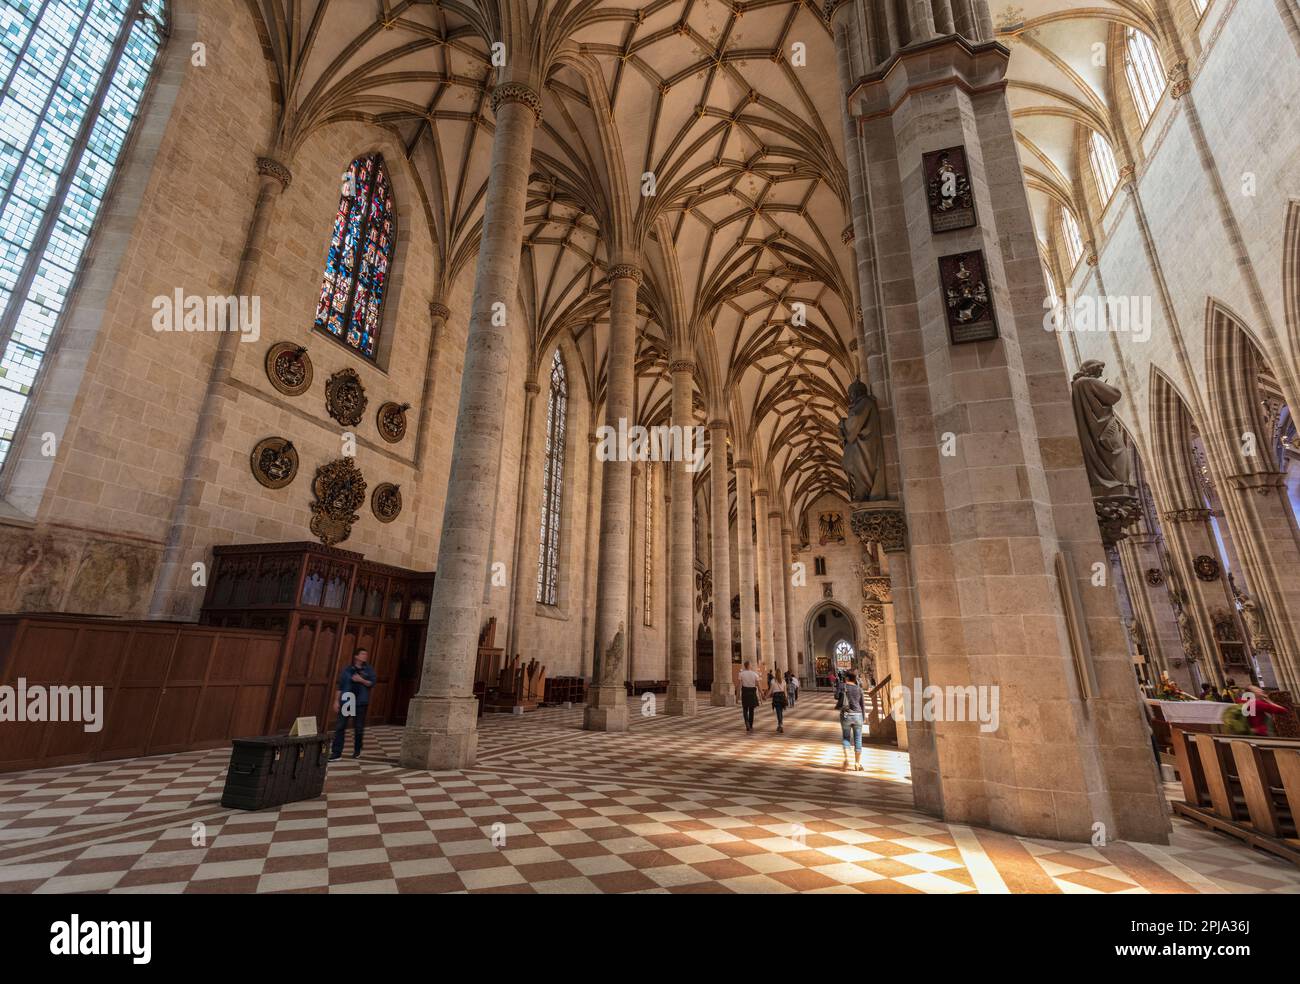 Inside the historic 16th century Gothic Ulm Minster or Cathedral - Ulmer Munster in Old Town, Altstadt, Ulm. Stock Photo